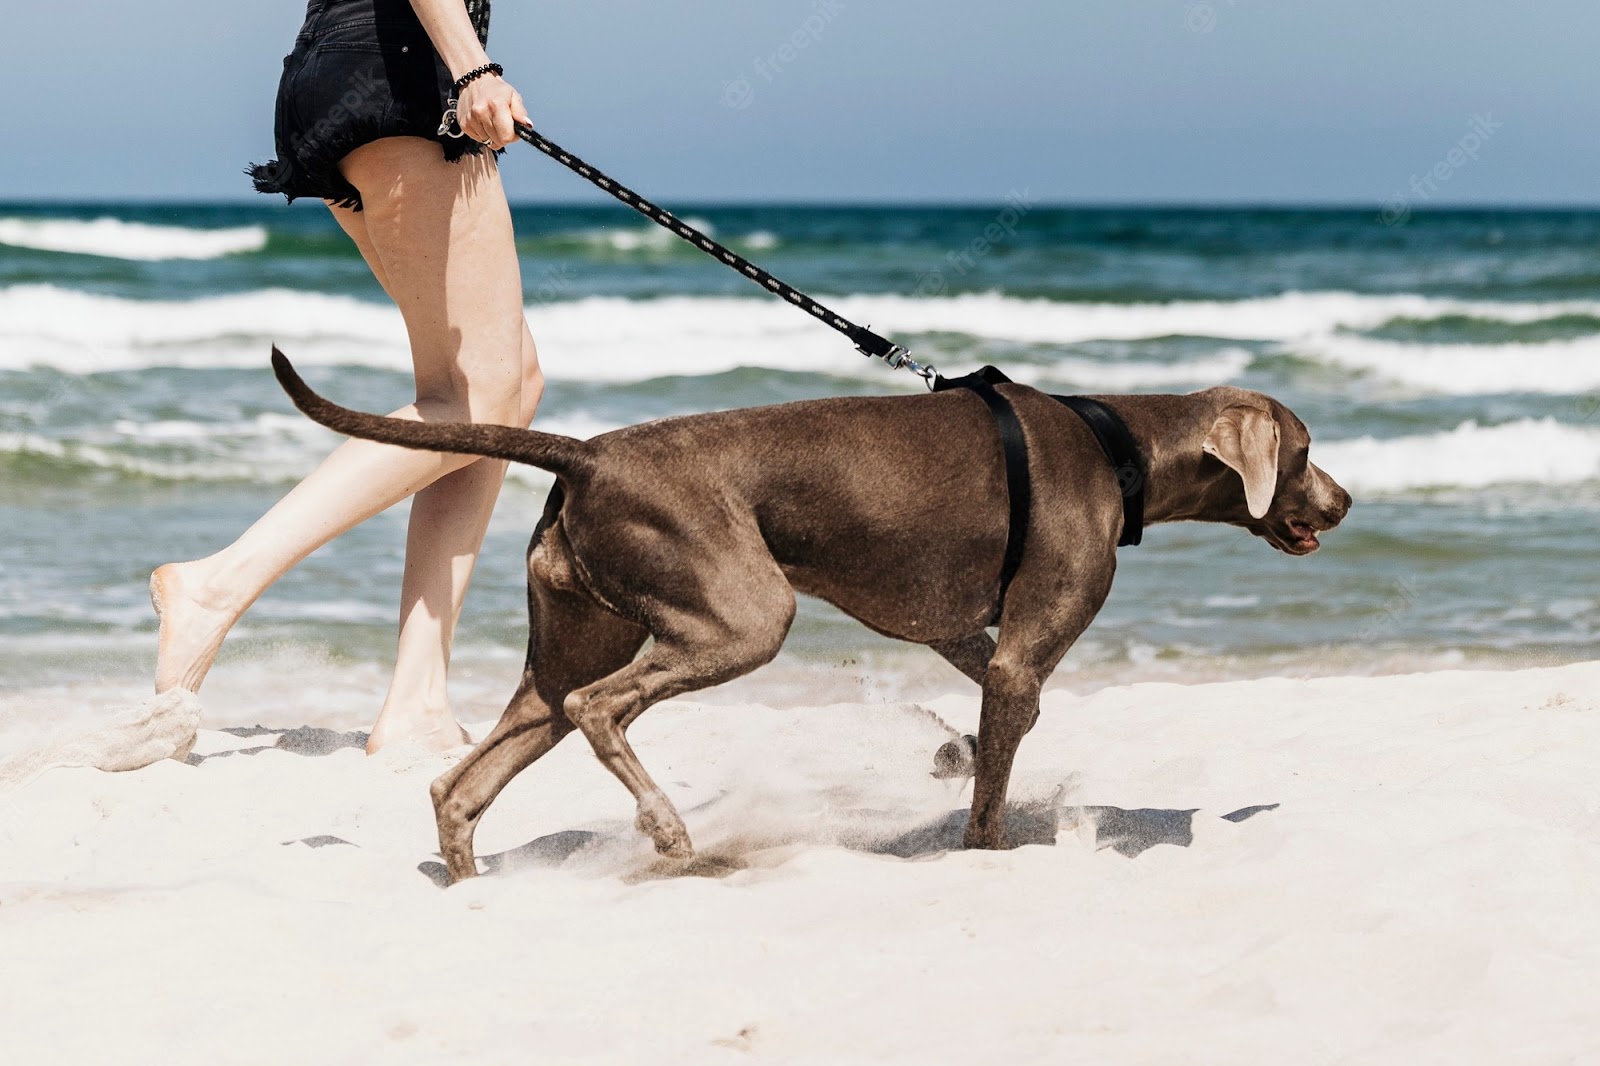 In the canine-friendly community of Seaside, it's typical to see people taking their dogs for walks along the shore.